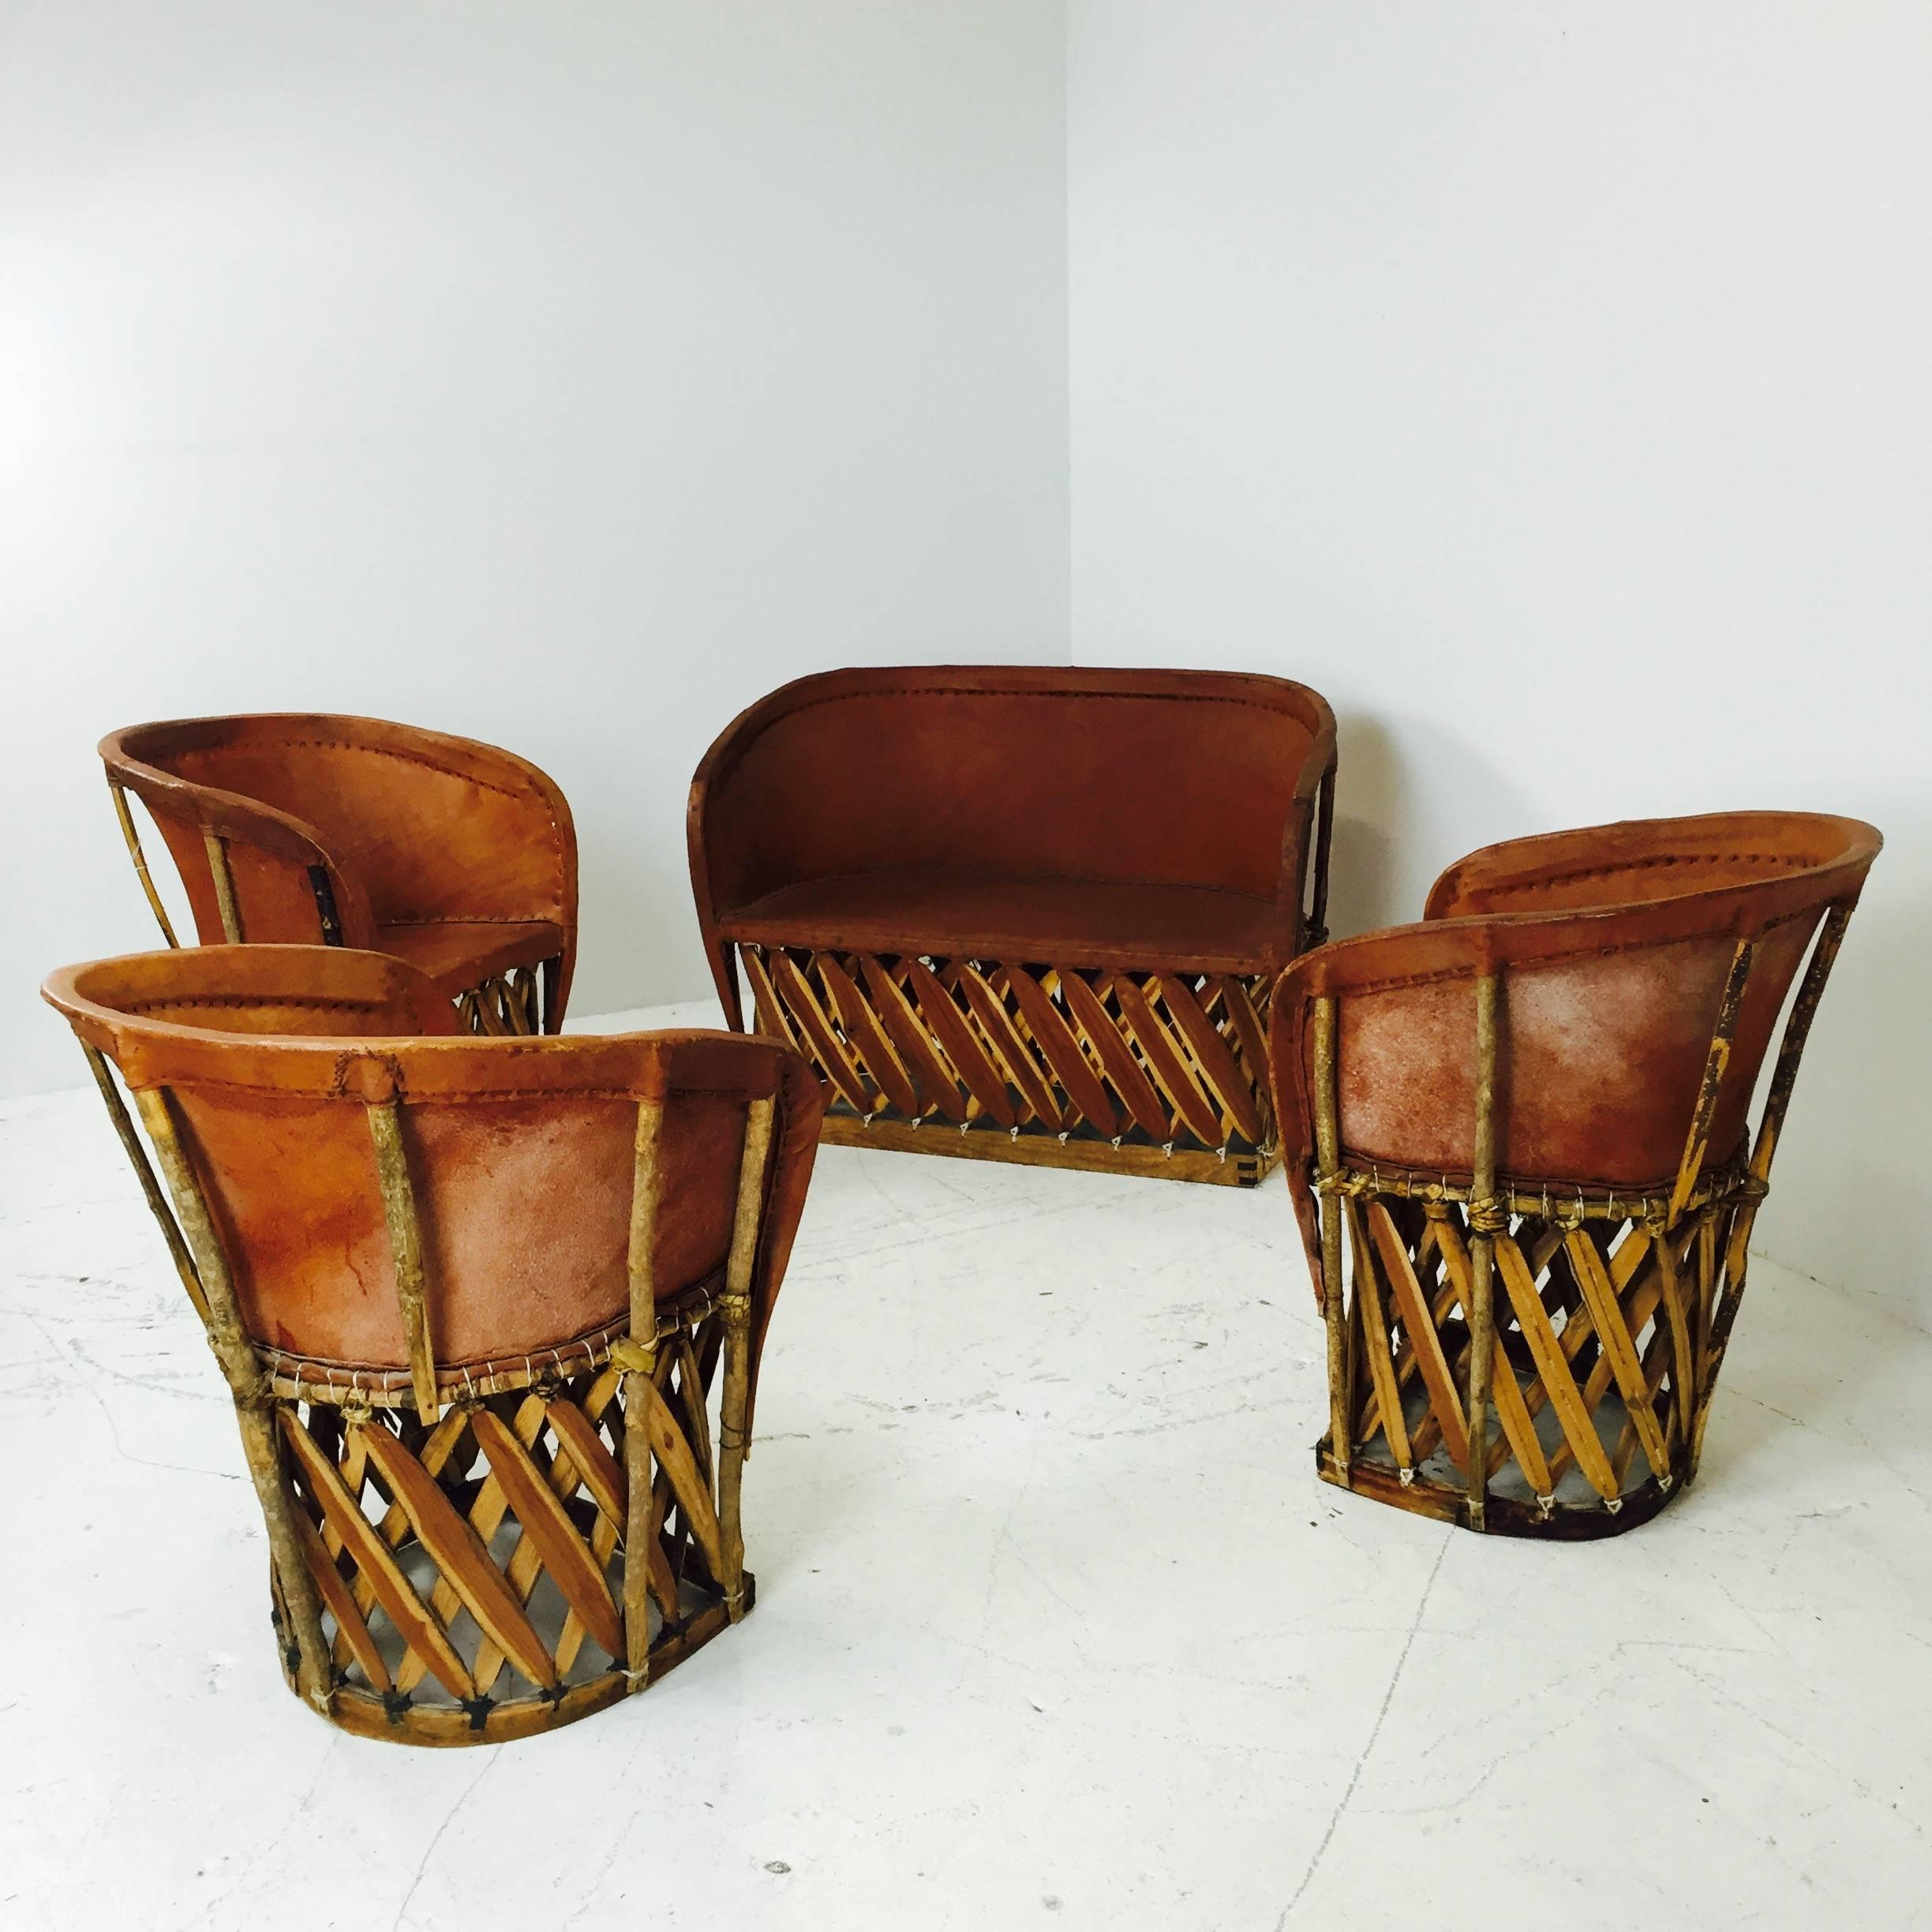 These chairs are handcrafted in Mexico from tobacco colored pigskin and cedar. This set has a settee and three armchairs. Perfect for indoor or covered outdoor living.

Dimensions: 44